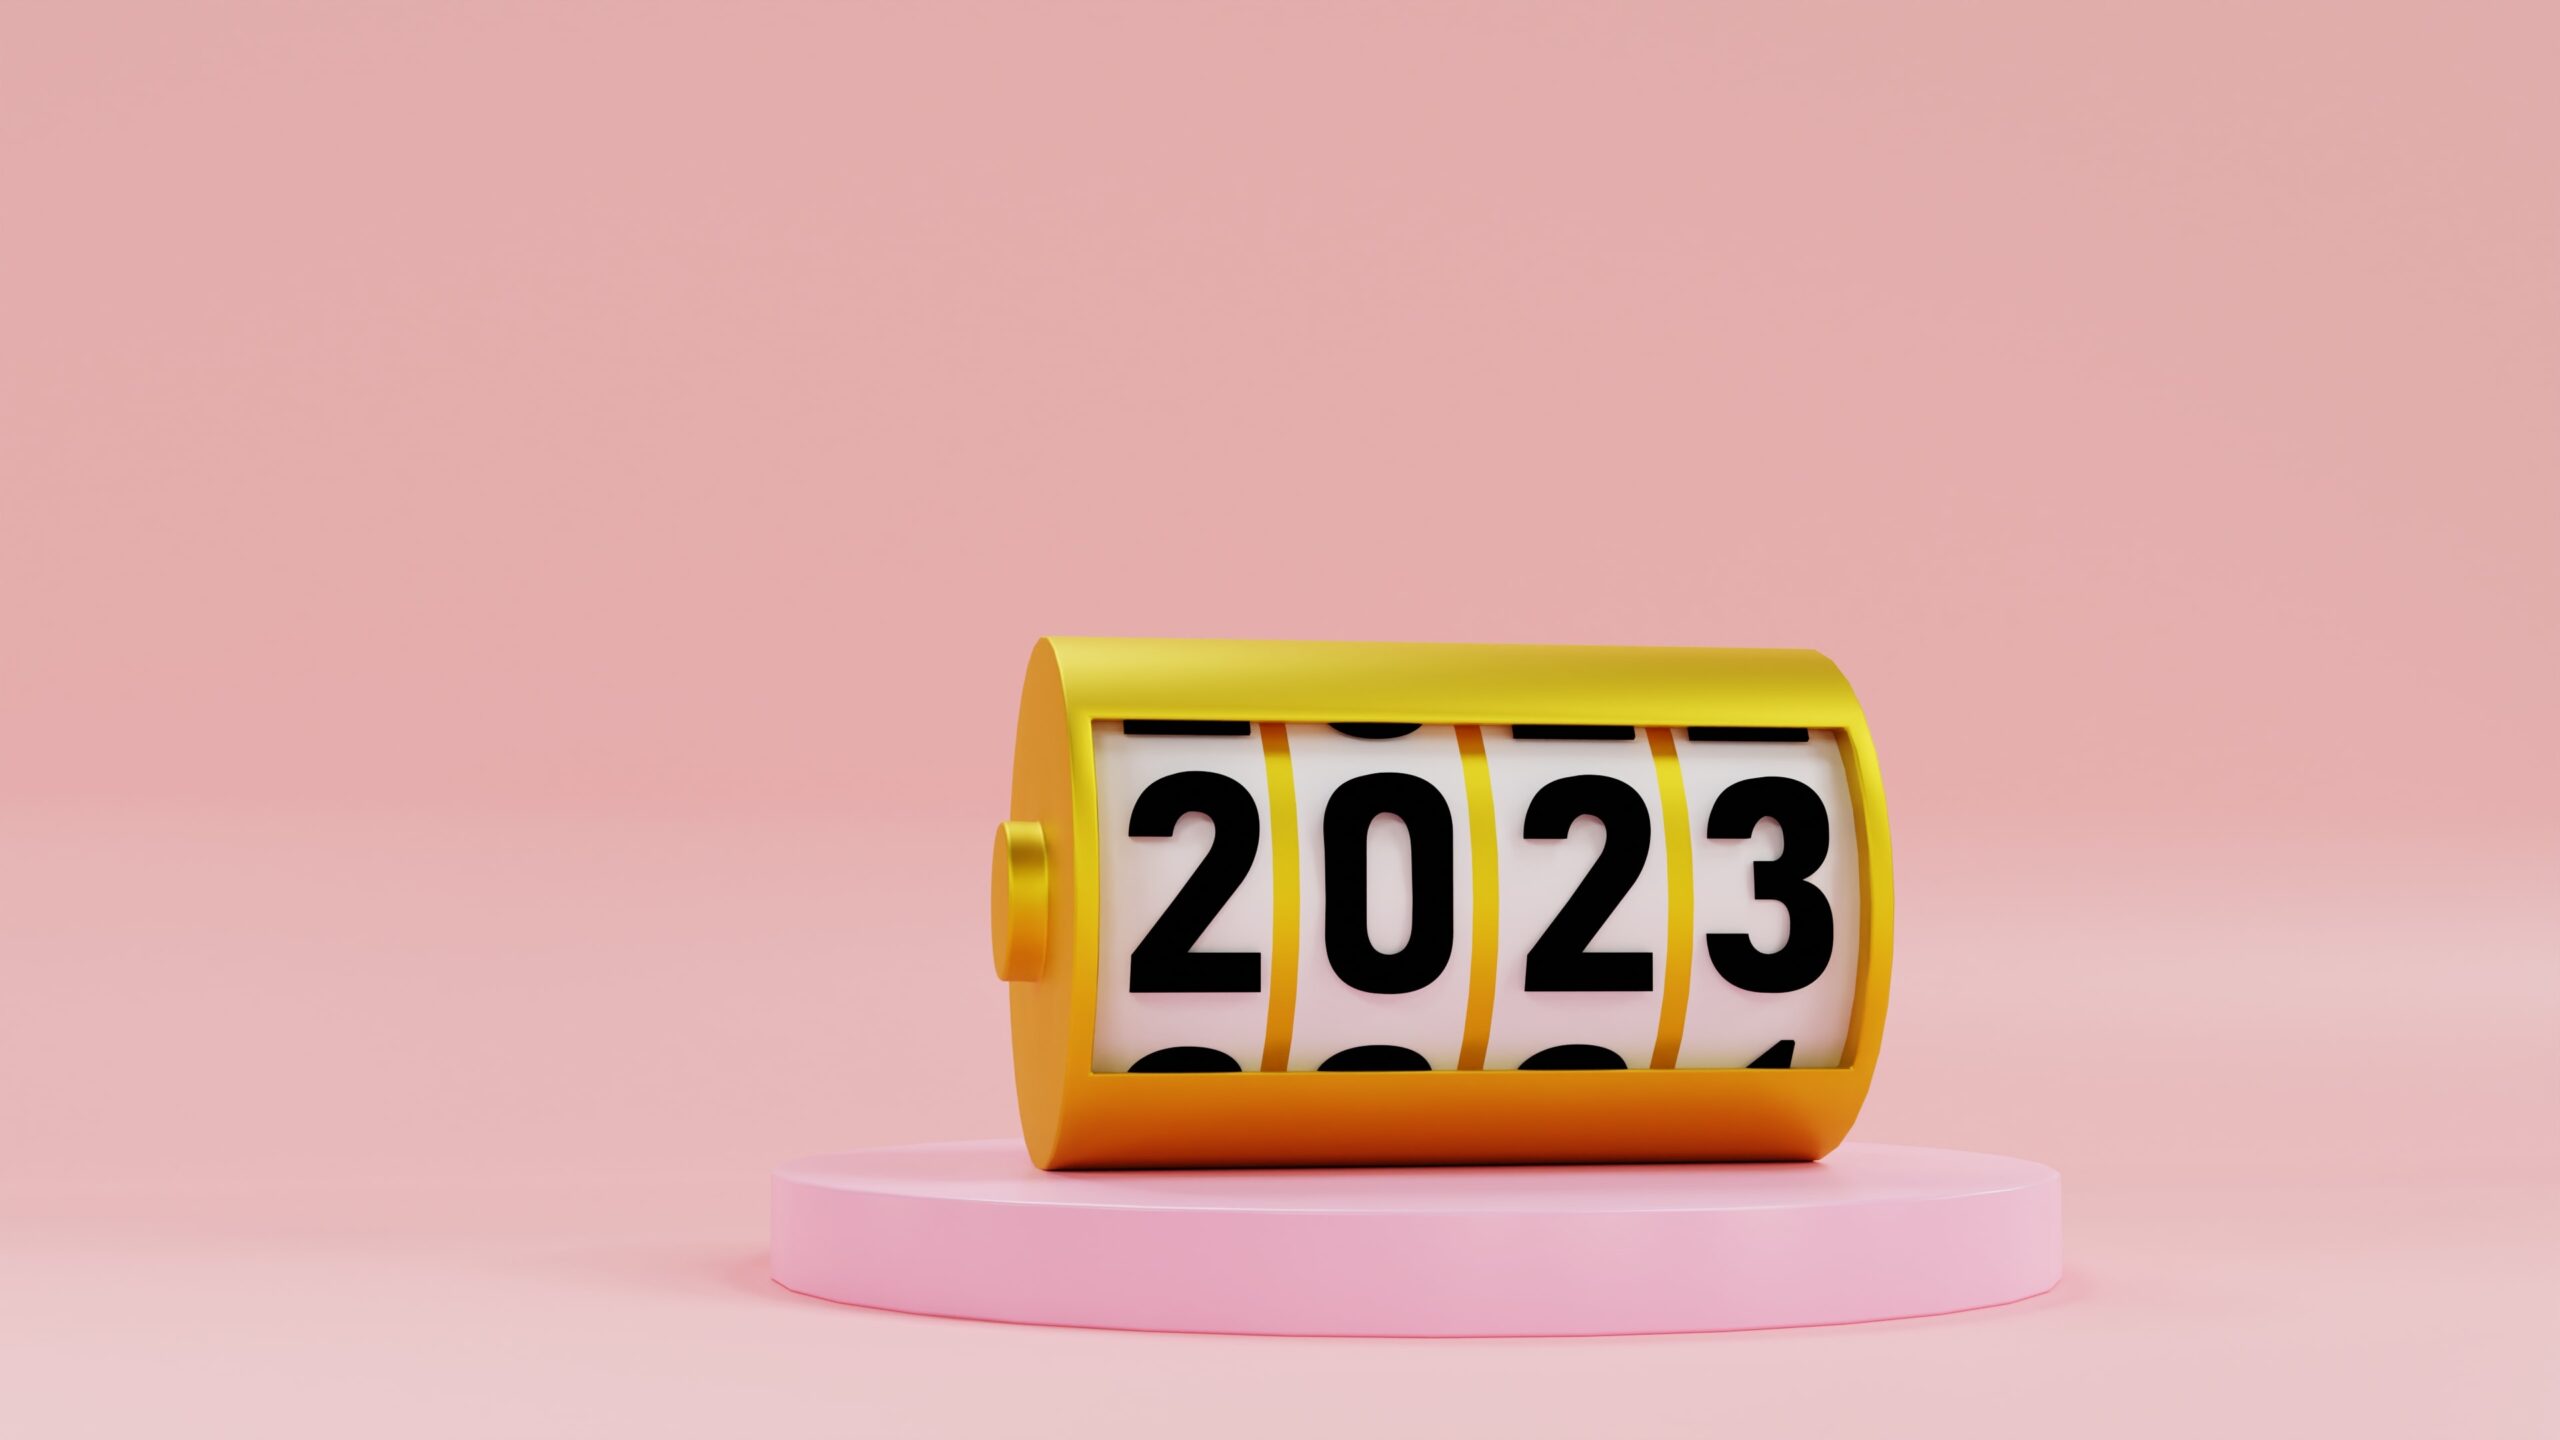 marketing automation trends for 2023